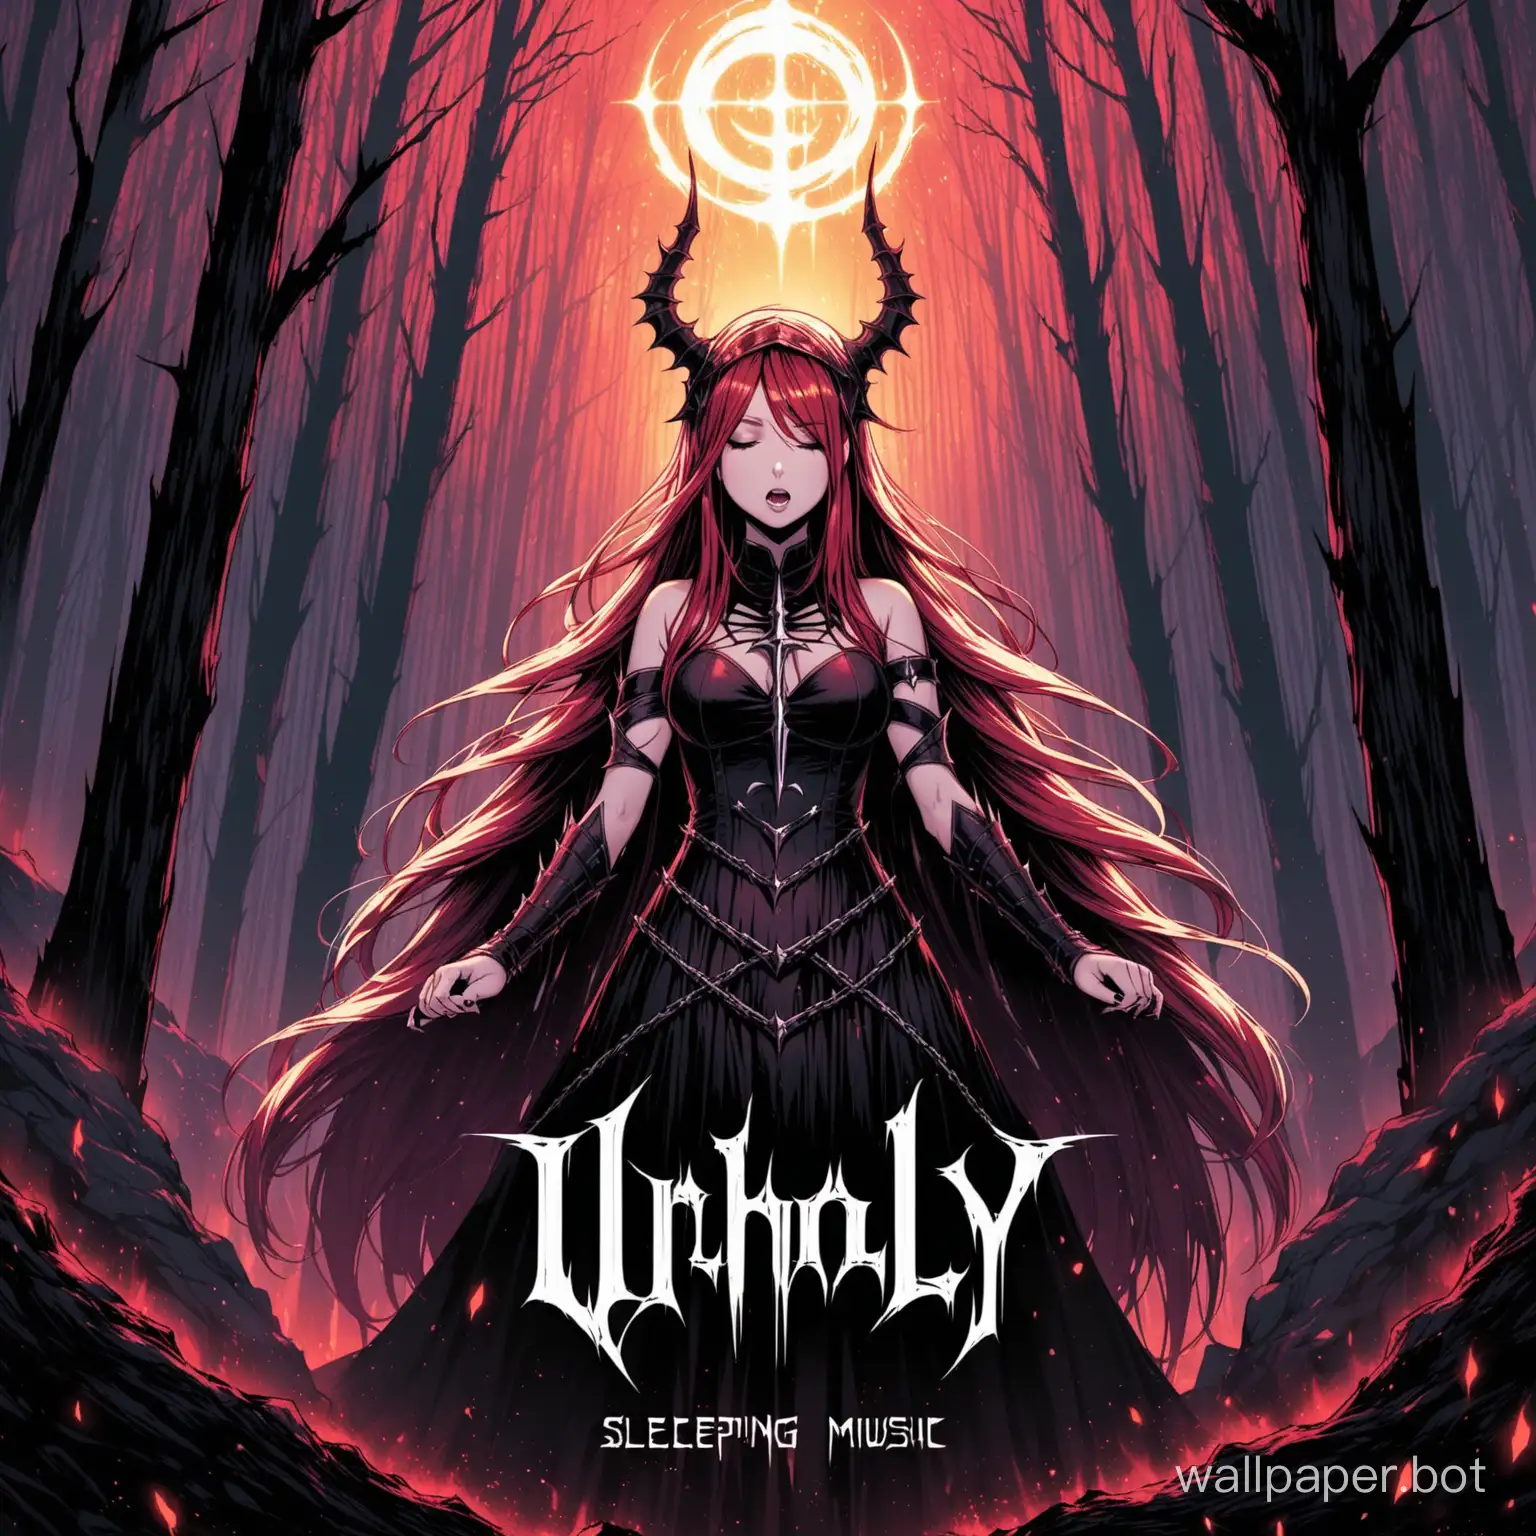 Unholy-Metal-Cover-by-Lollia-featuring-sleepingforestmusic